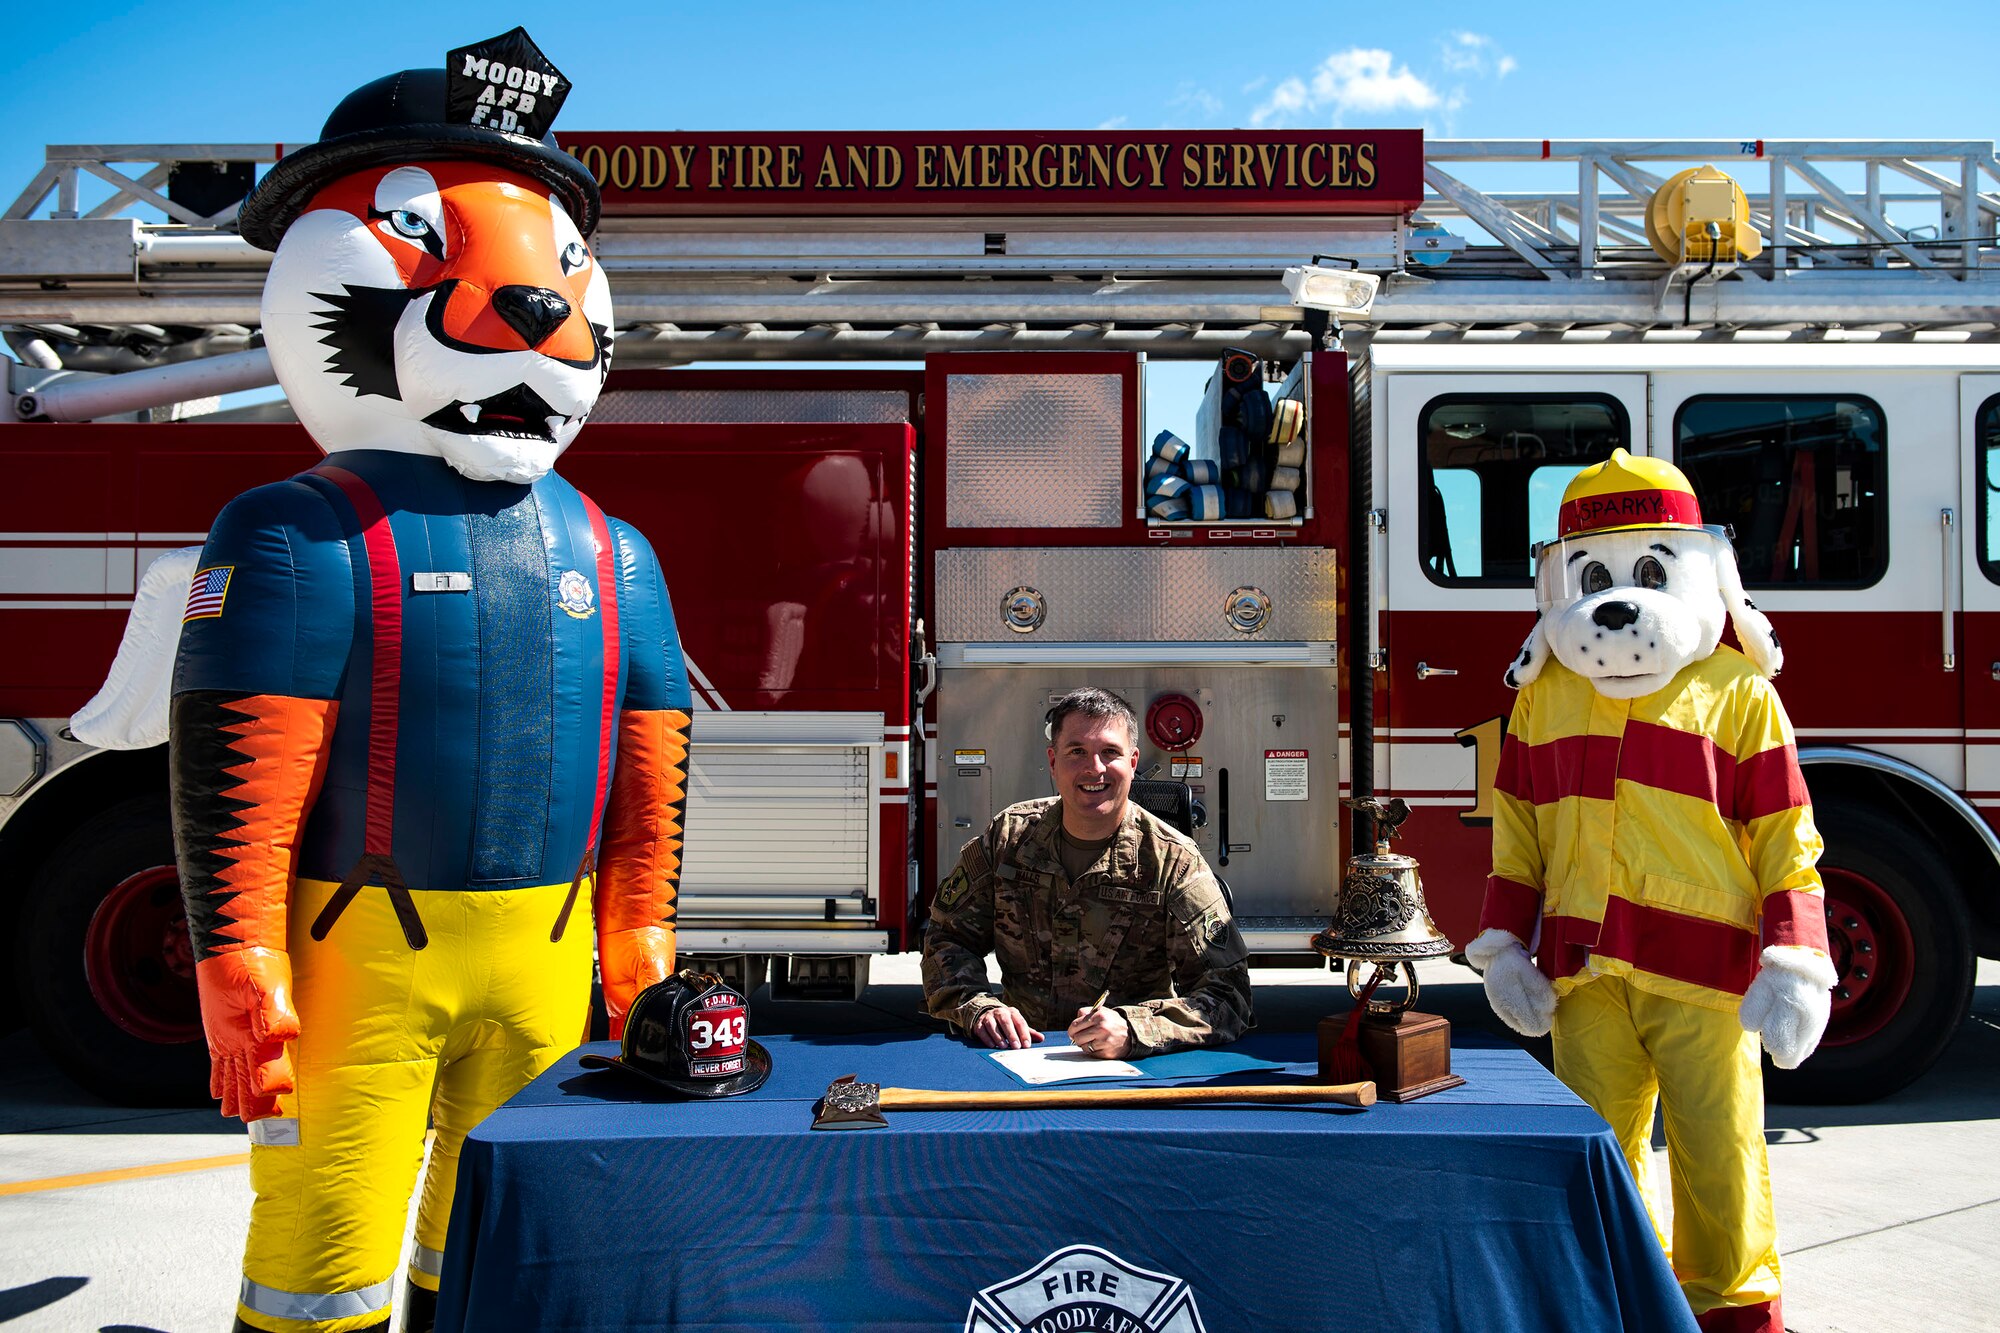 Col. Daniel P. Walls, 23d Wing commander, center, poses for a picture with 23d Civil Engineer Squadron mascots, Sparky and Firefighter Flying Tiger, Sept. 23, 2019, at Moody Air Force Base, Ga. Walls proclaimed the week of Oct. 6-12 as Fire Prevention Week, which is designed to commemorate the sacrifices of our firefighters and teach fire safety to others. (U.S. Air Force photo by Senior Airman Erick Requadt)